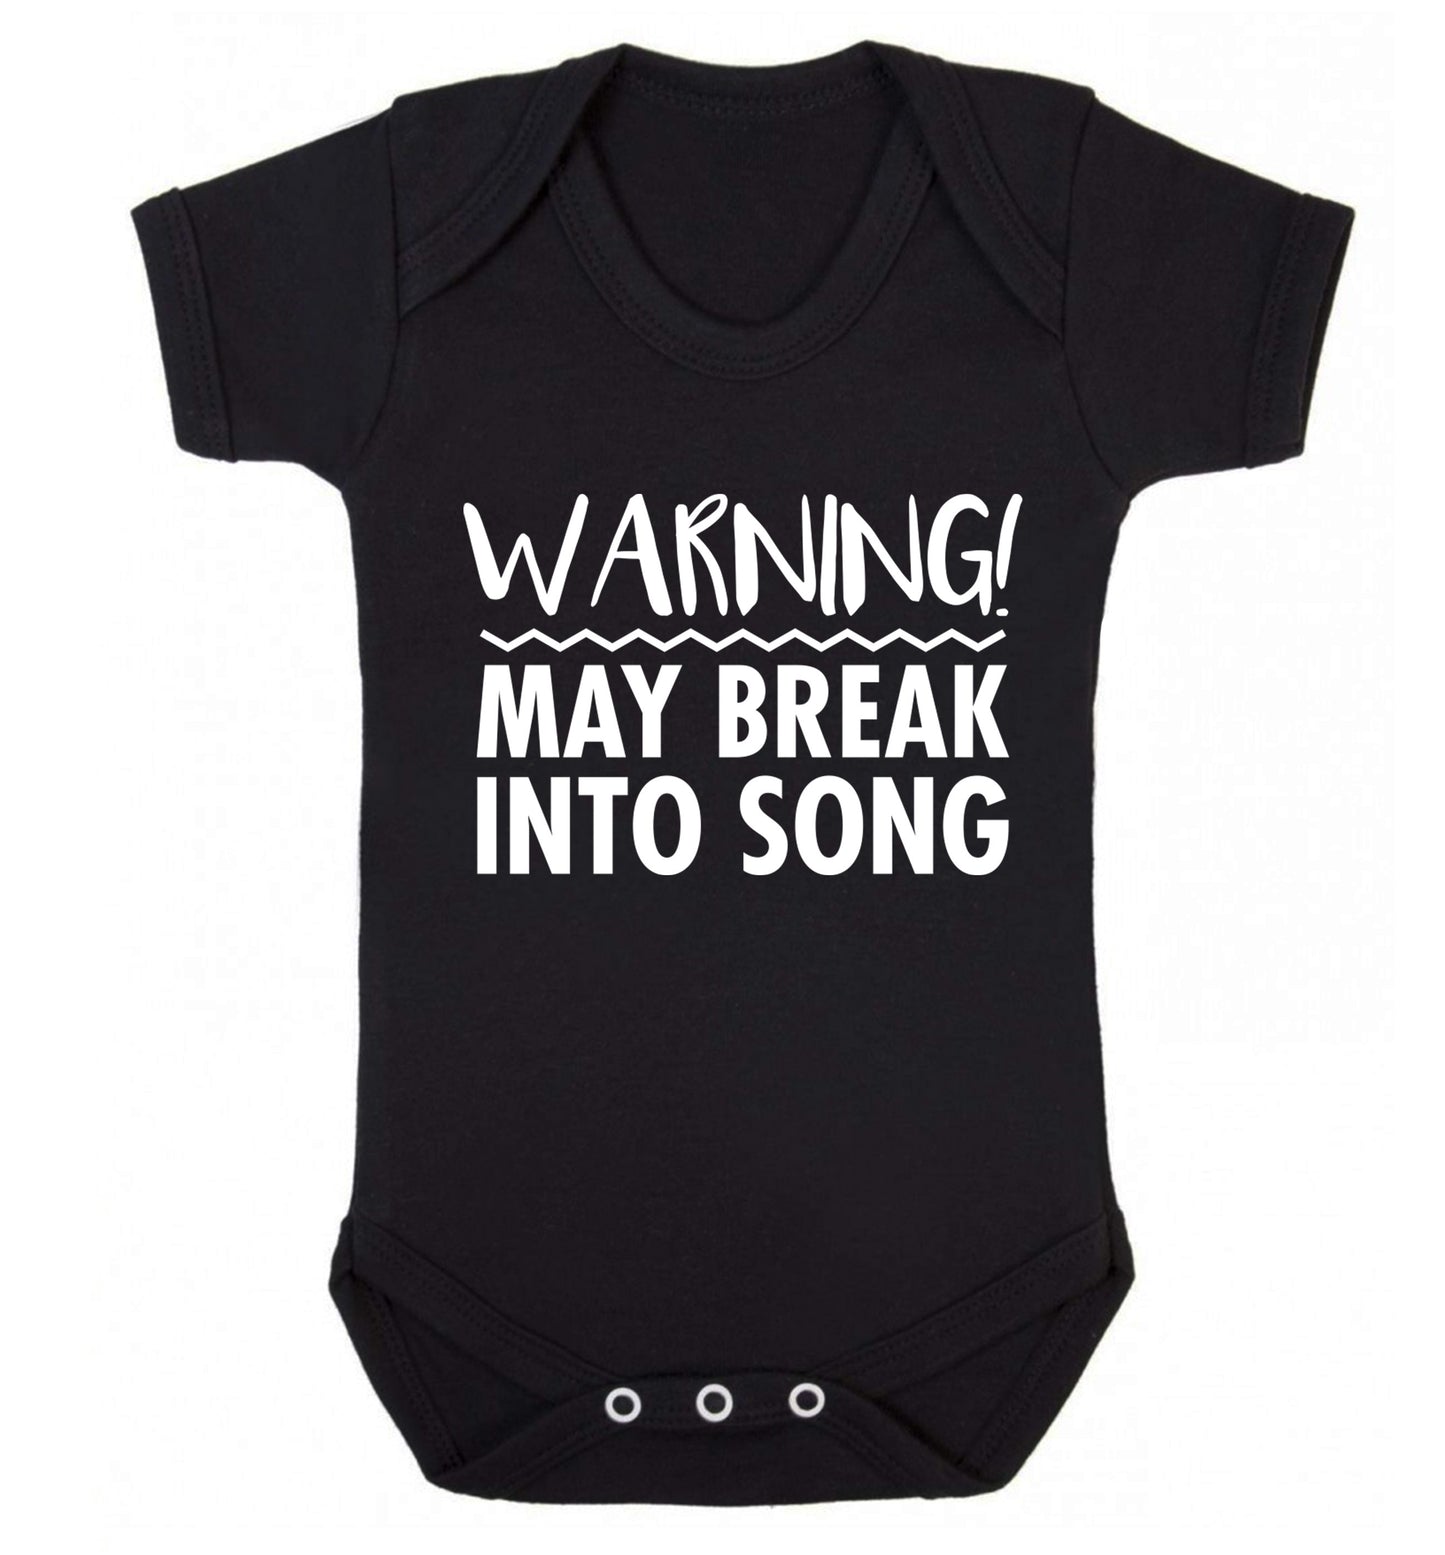 Warning may break into song Baby Vest black 18-24 months